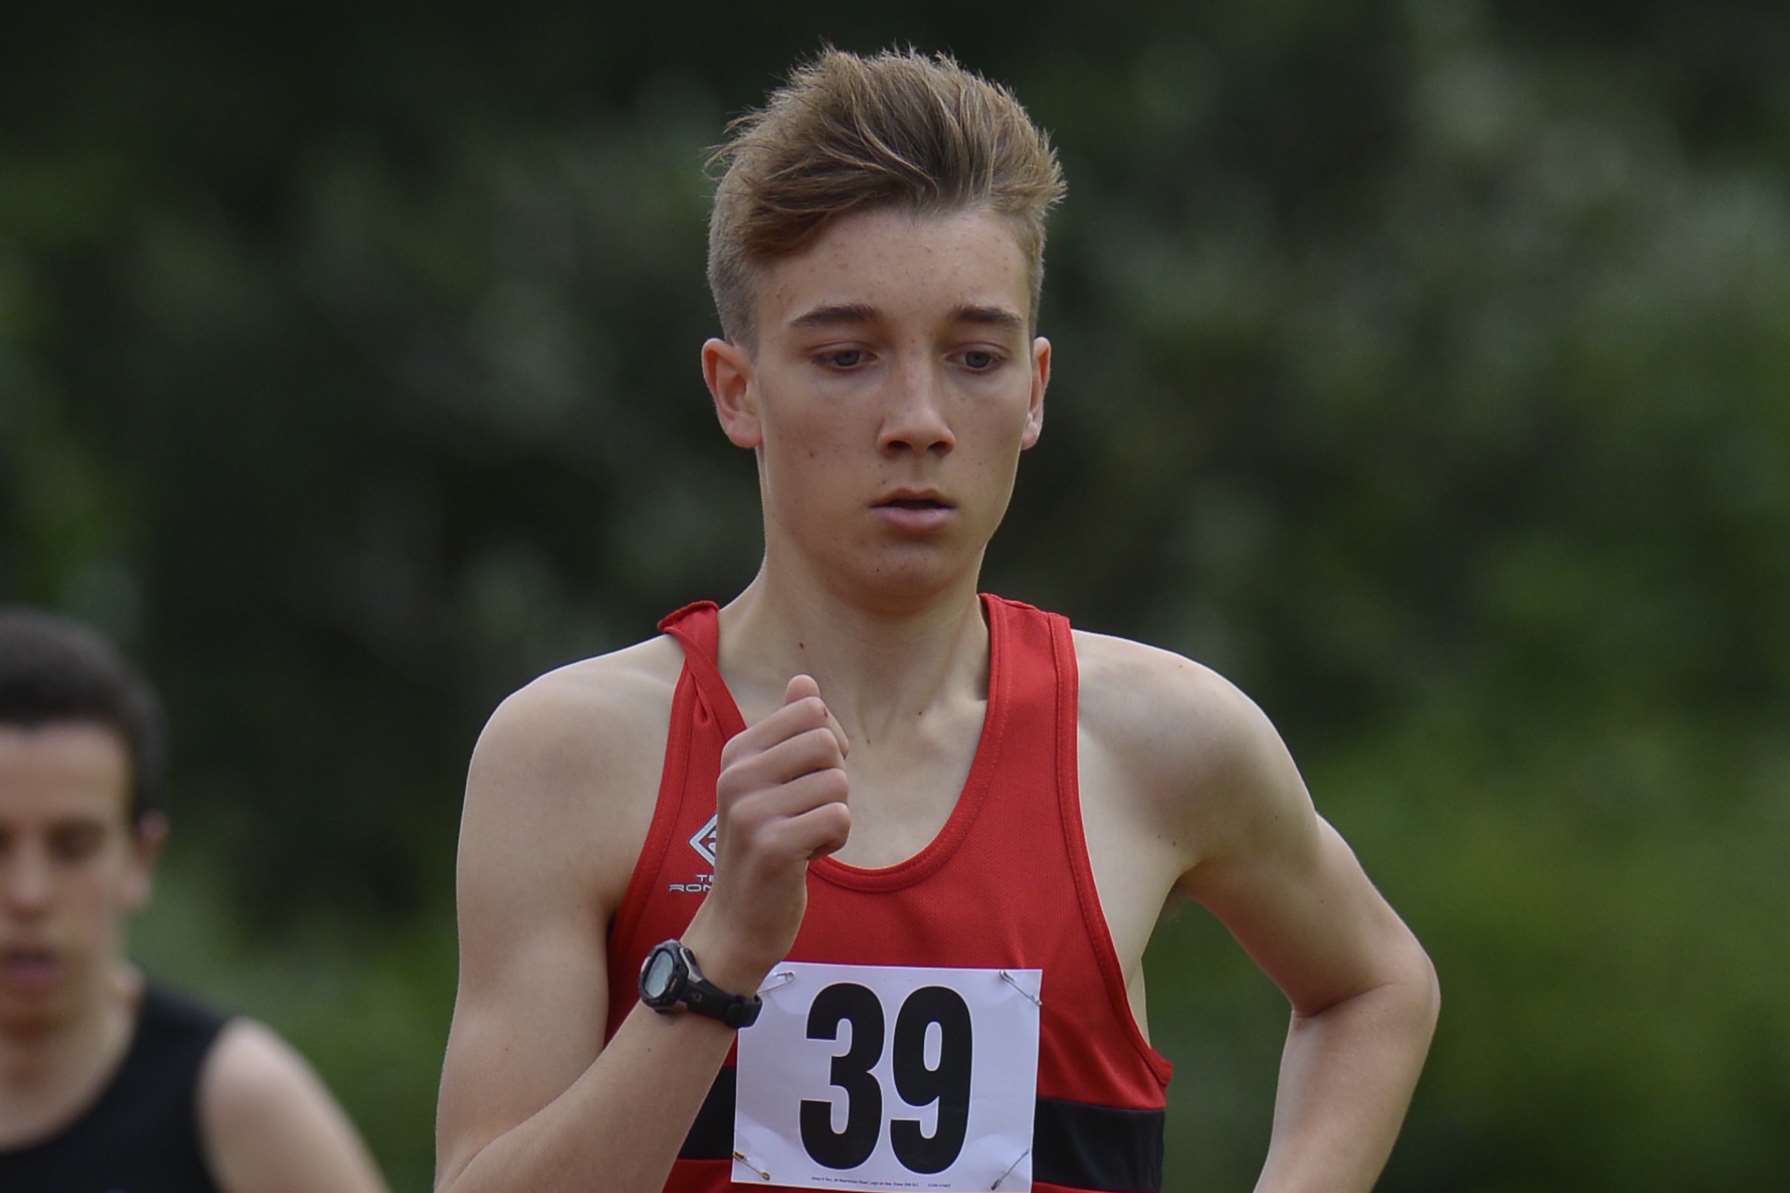 Medway and Maidstone's Jake Berry helped Kent secure under-17 team gold at the South of England Inter-Counties Cross-Country PIcture: Gary Browne